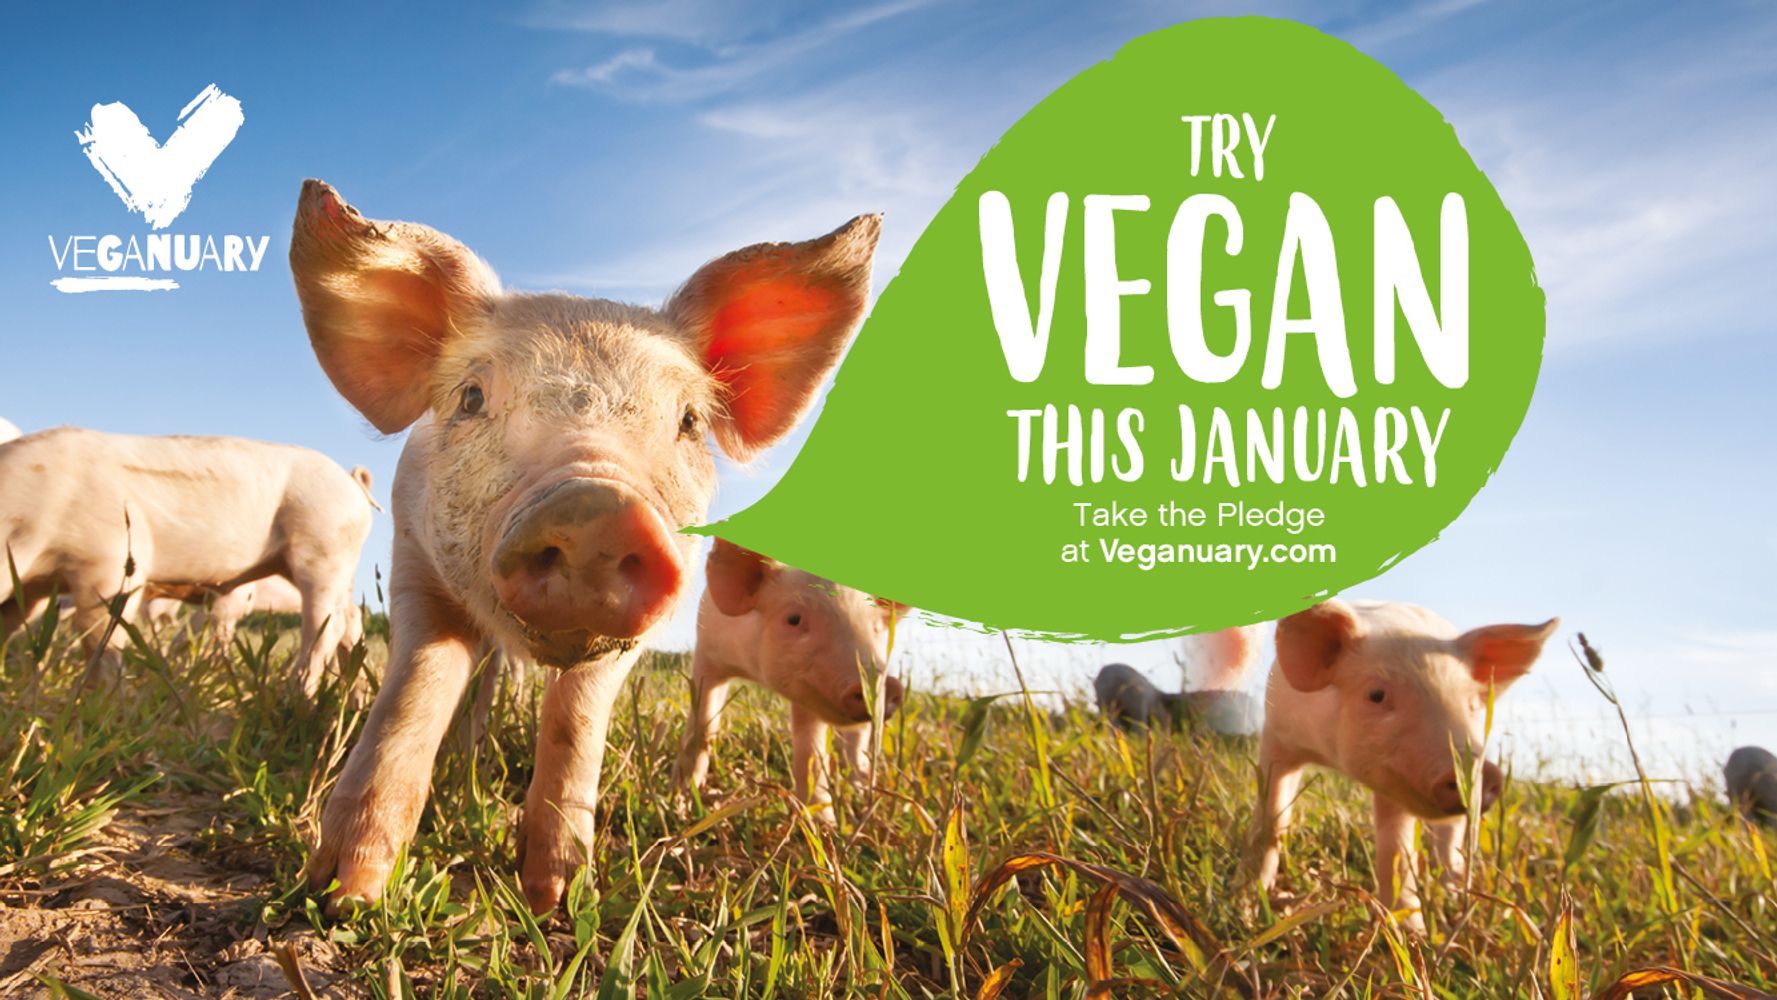 TIPS TO HELP YOU SUCCEED AT VEGANUARY 2021